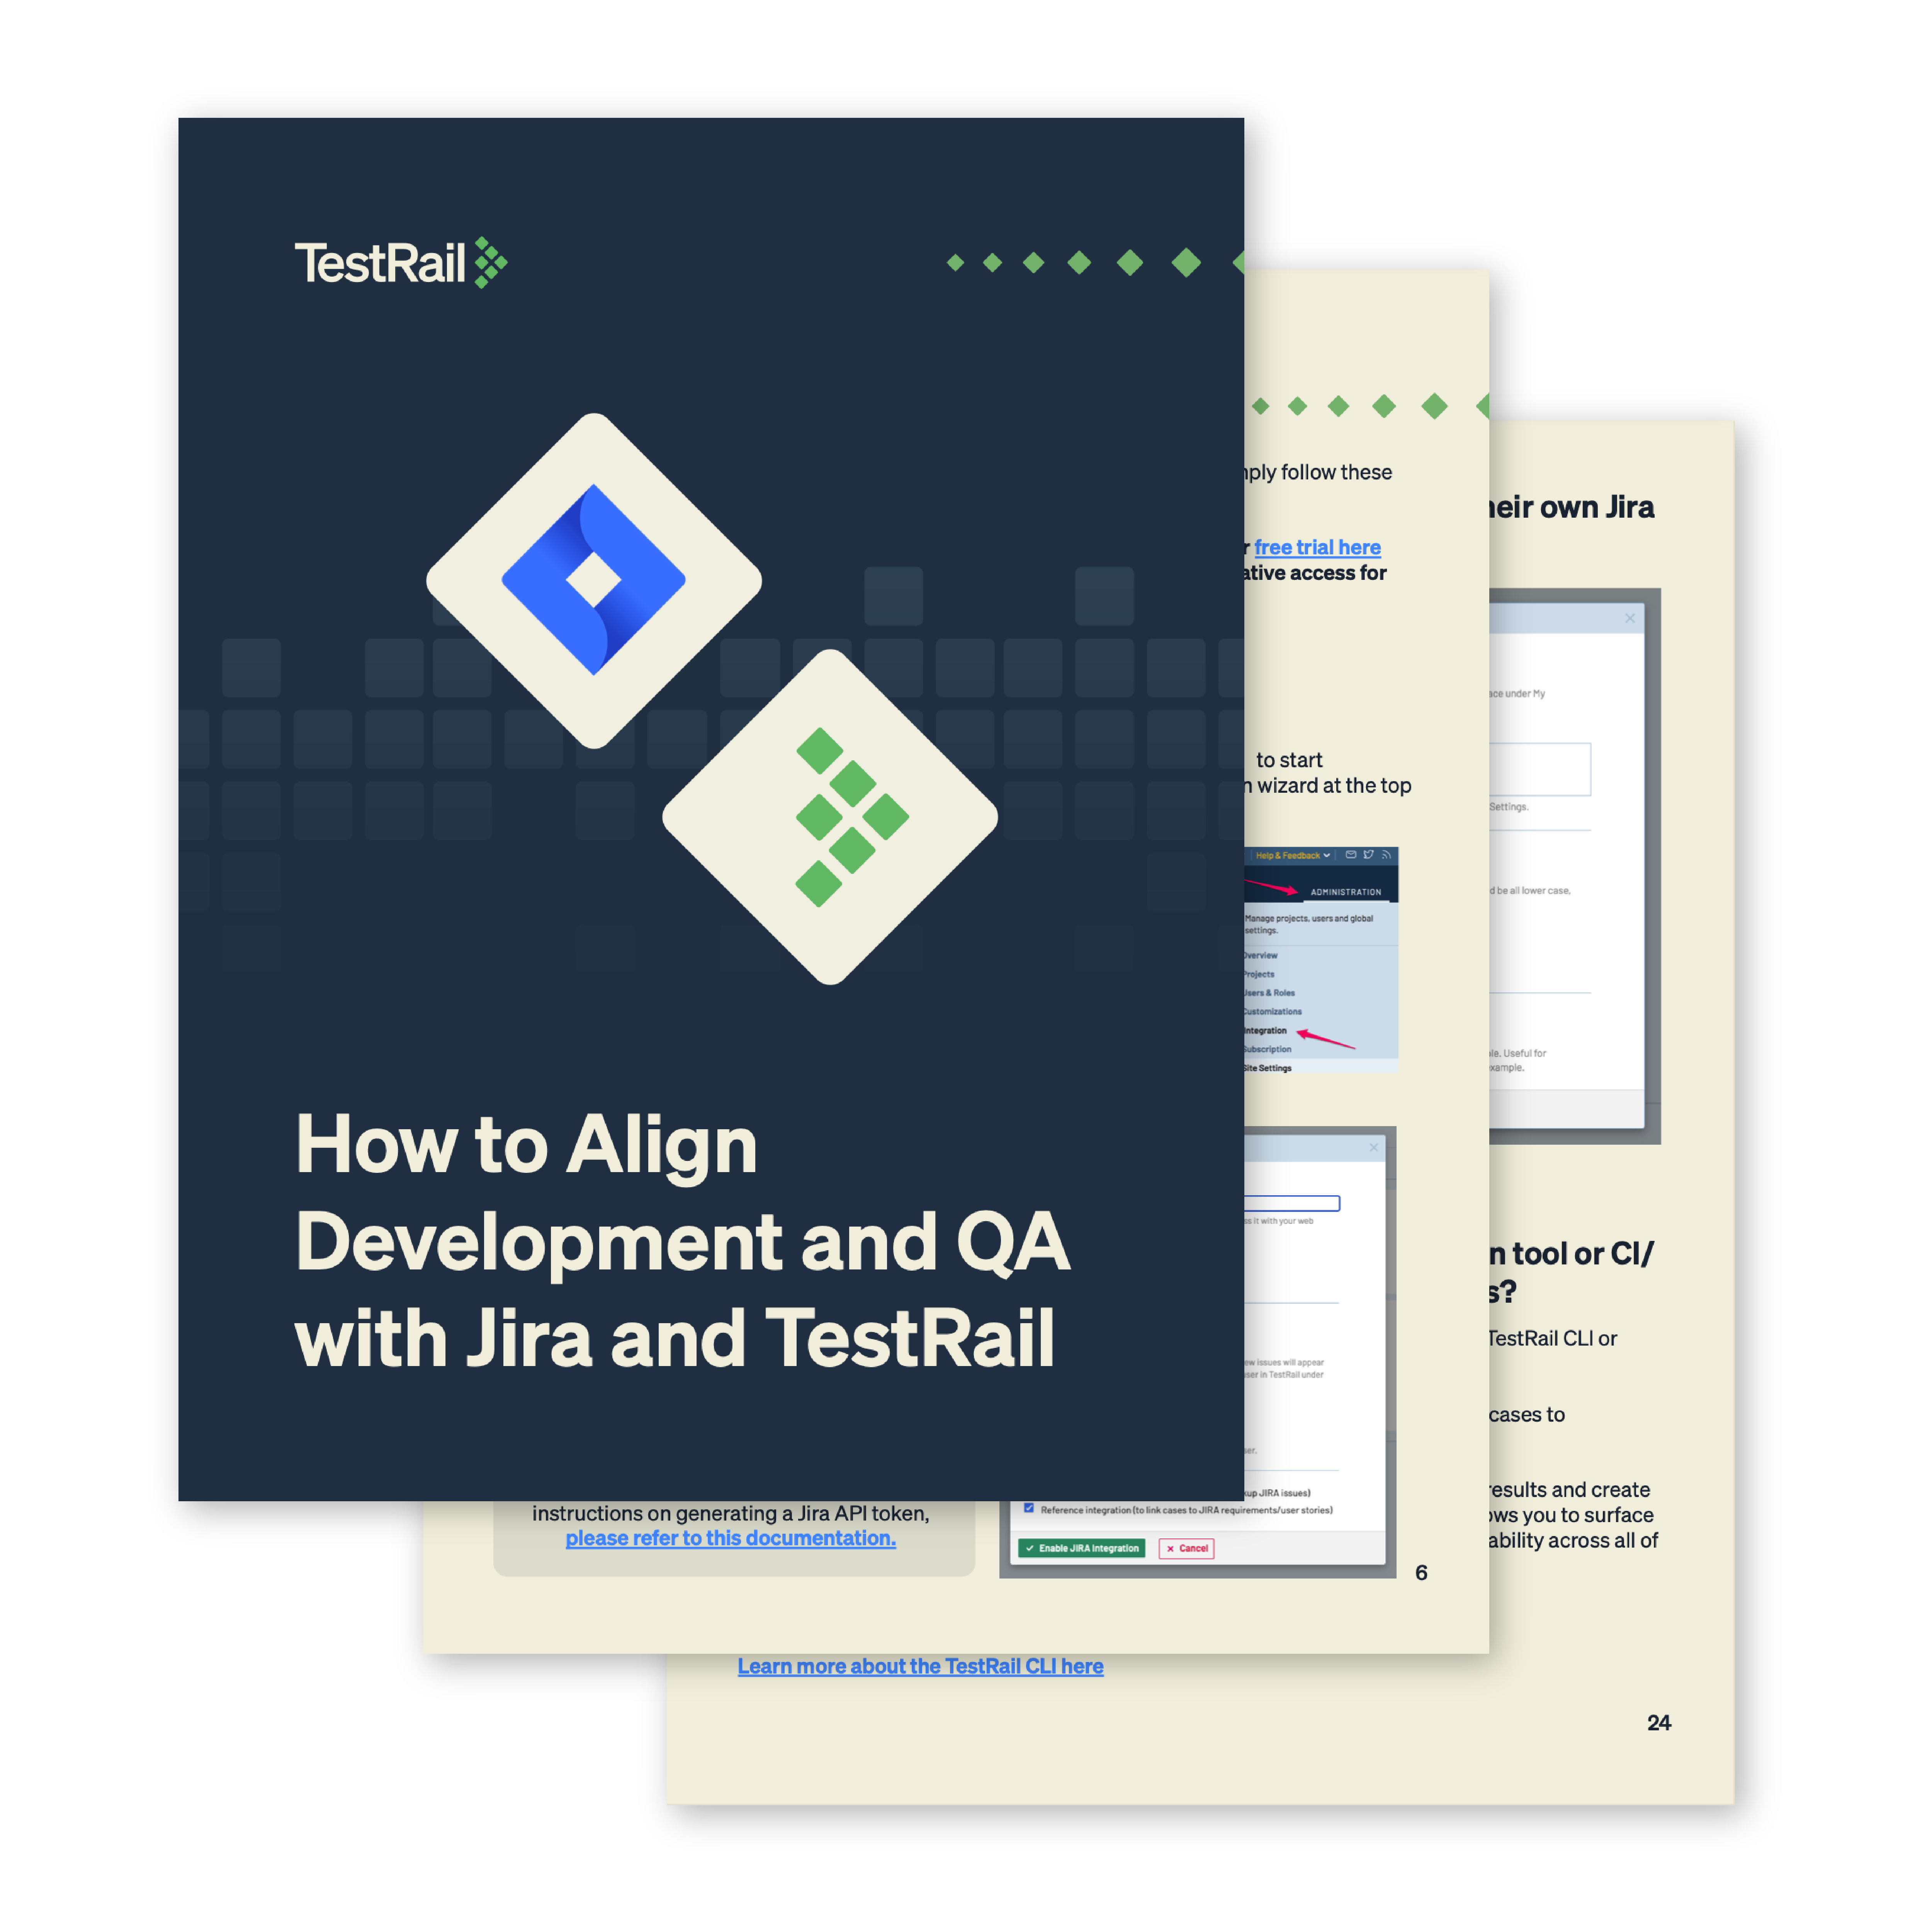 How to Align Development and QA with TestRail and Jira